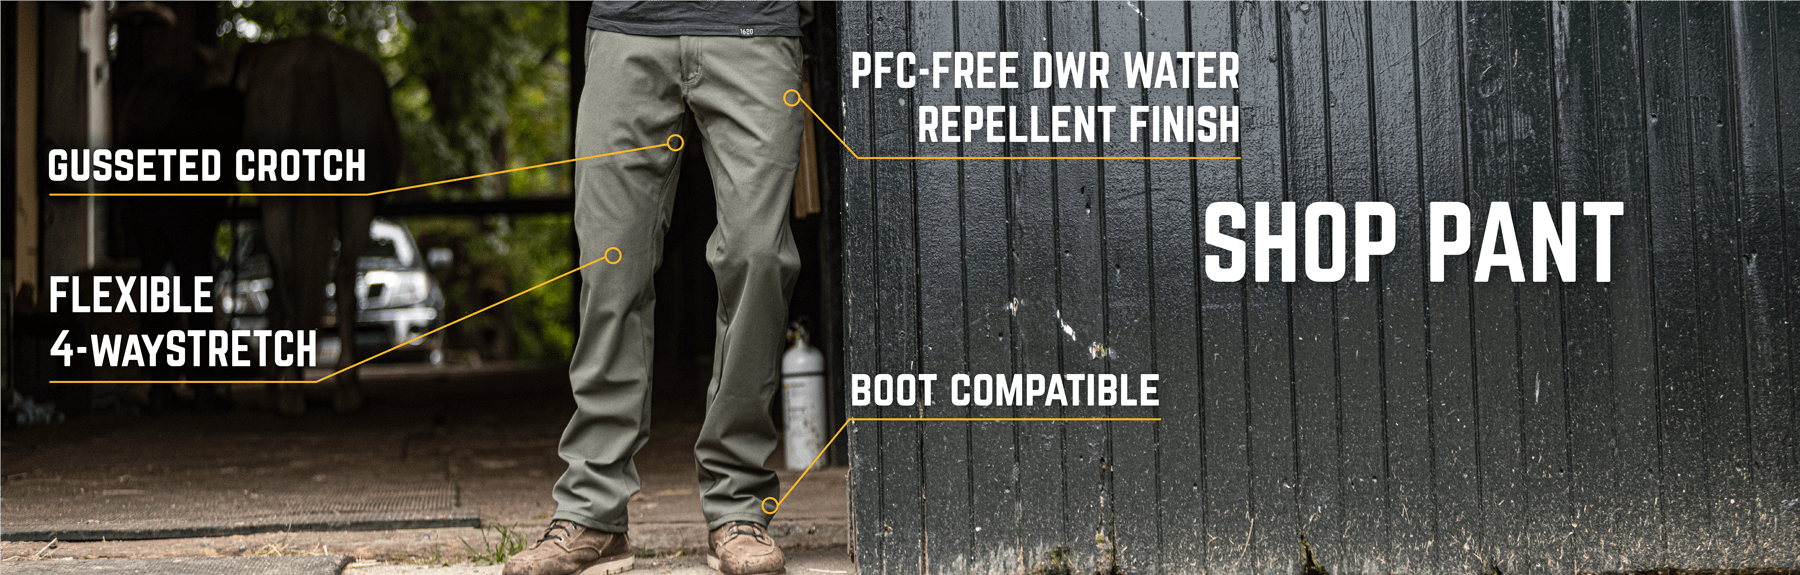 Description of 1620 Shop Pant featuring flexible 4-say stretch, gusseted crotch, PFC-Free DWR water repellant Finish and constructed for boot compatibility